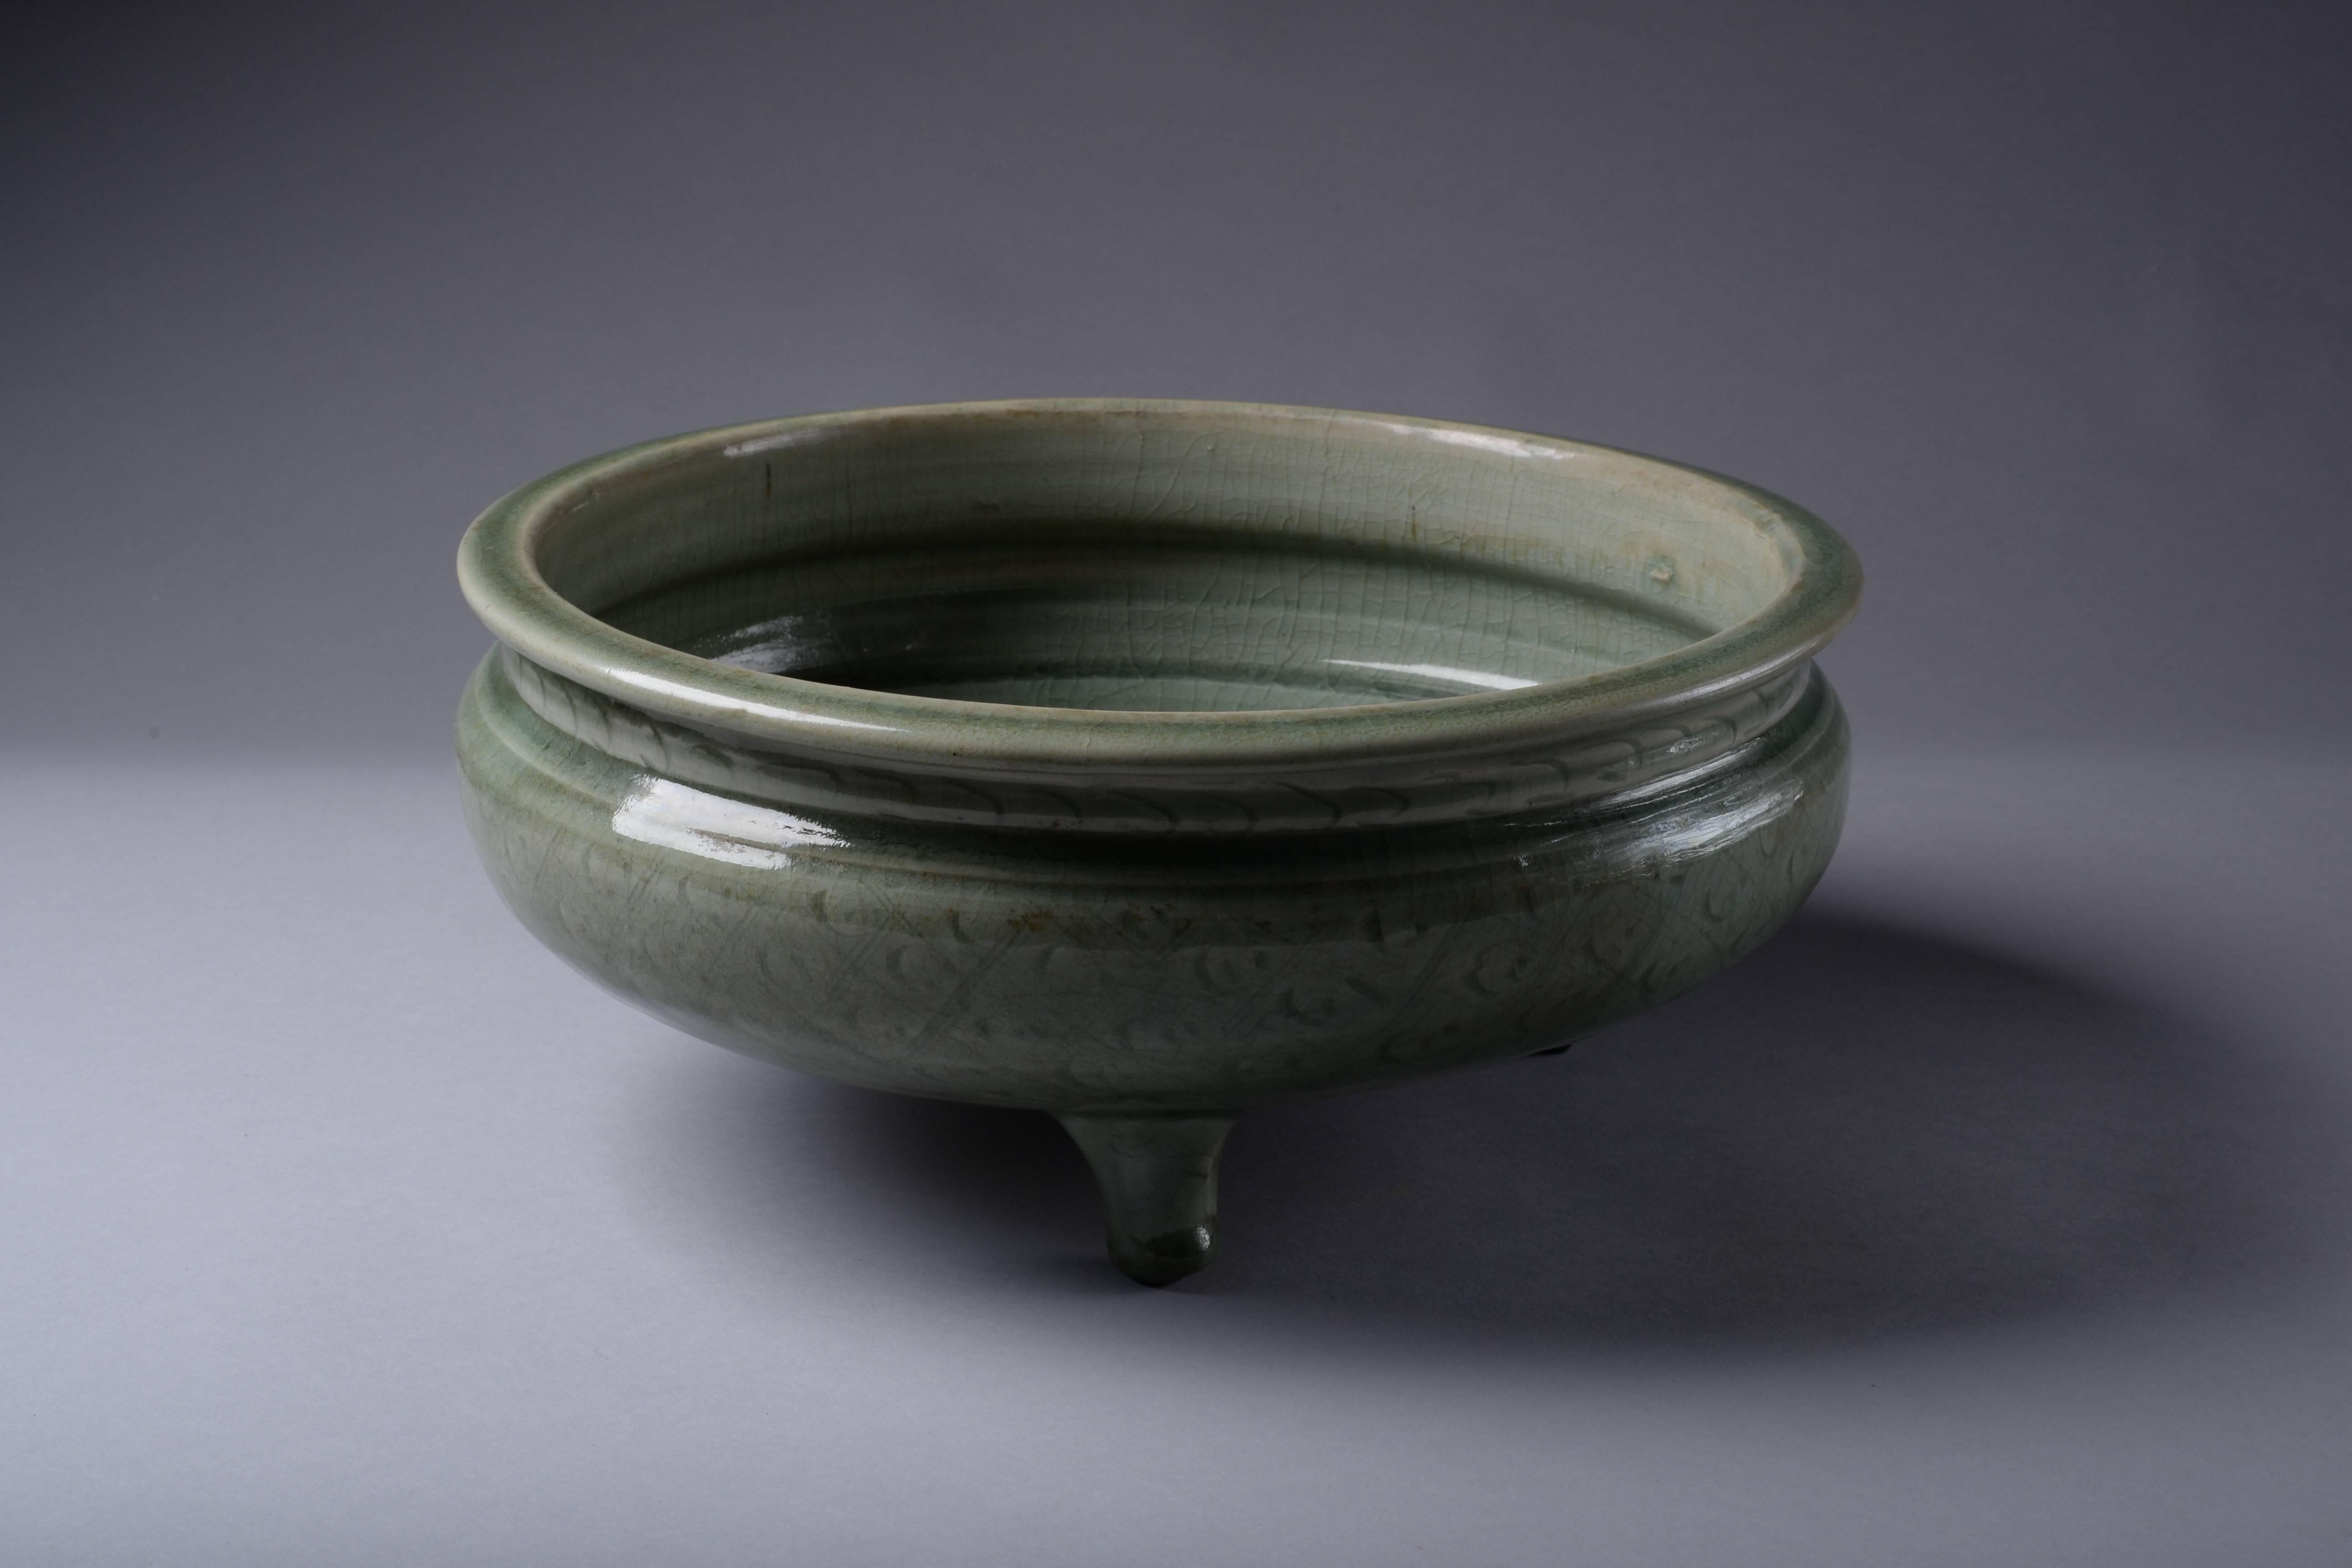 A beautiful Ming dynasty celadon glazed tripod censer, used for burning incense, from the Longquan kilns and dating to the 14th-17th century.

The large shallow bowl with a short but wide neck, everted rim, circular base and three cylindrical